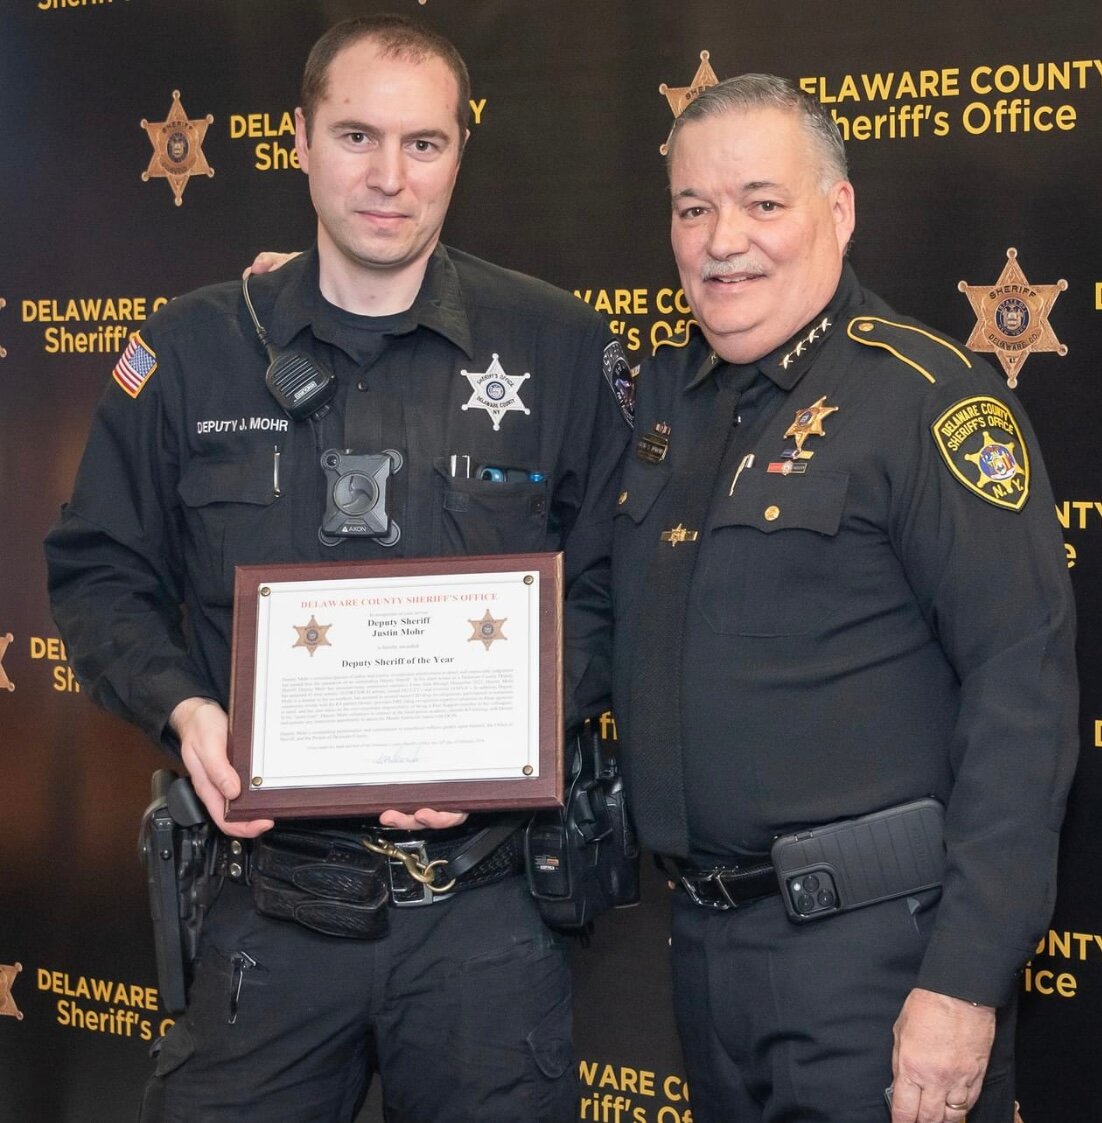 Deputy Justin Mohr was recognized as Deputy Sheriff of the Year, among other awardees.